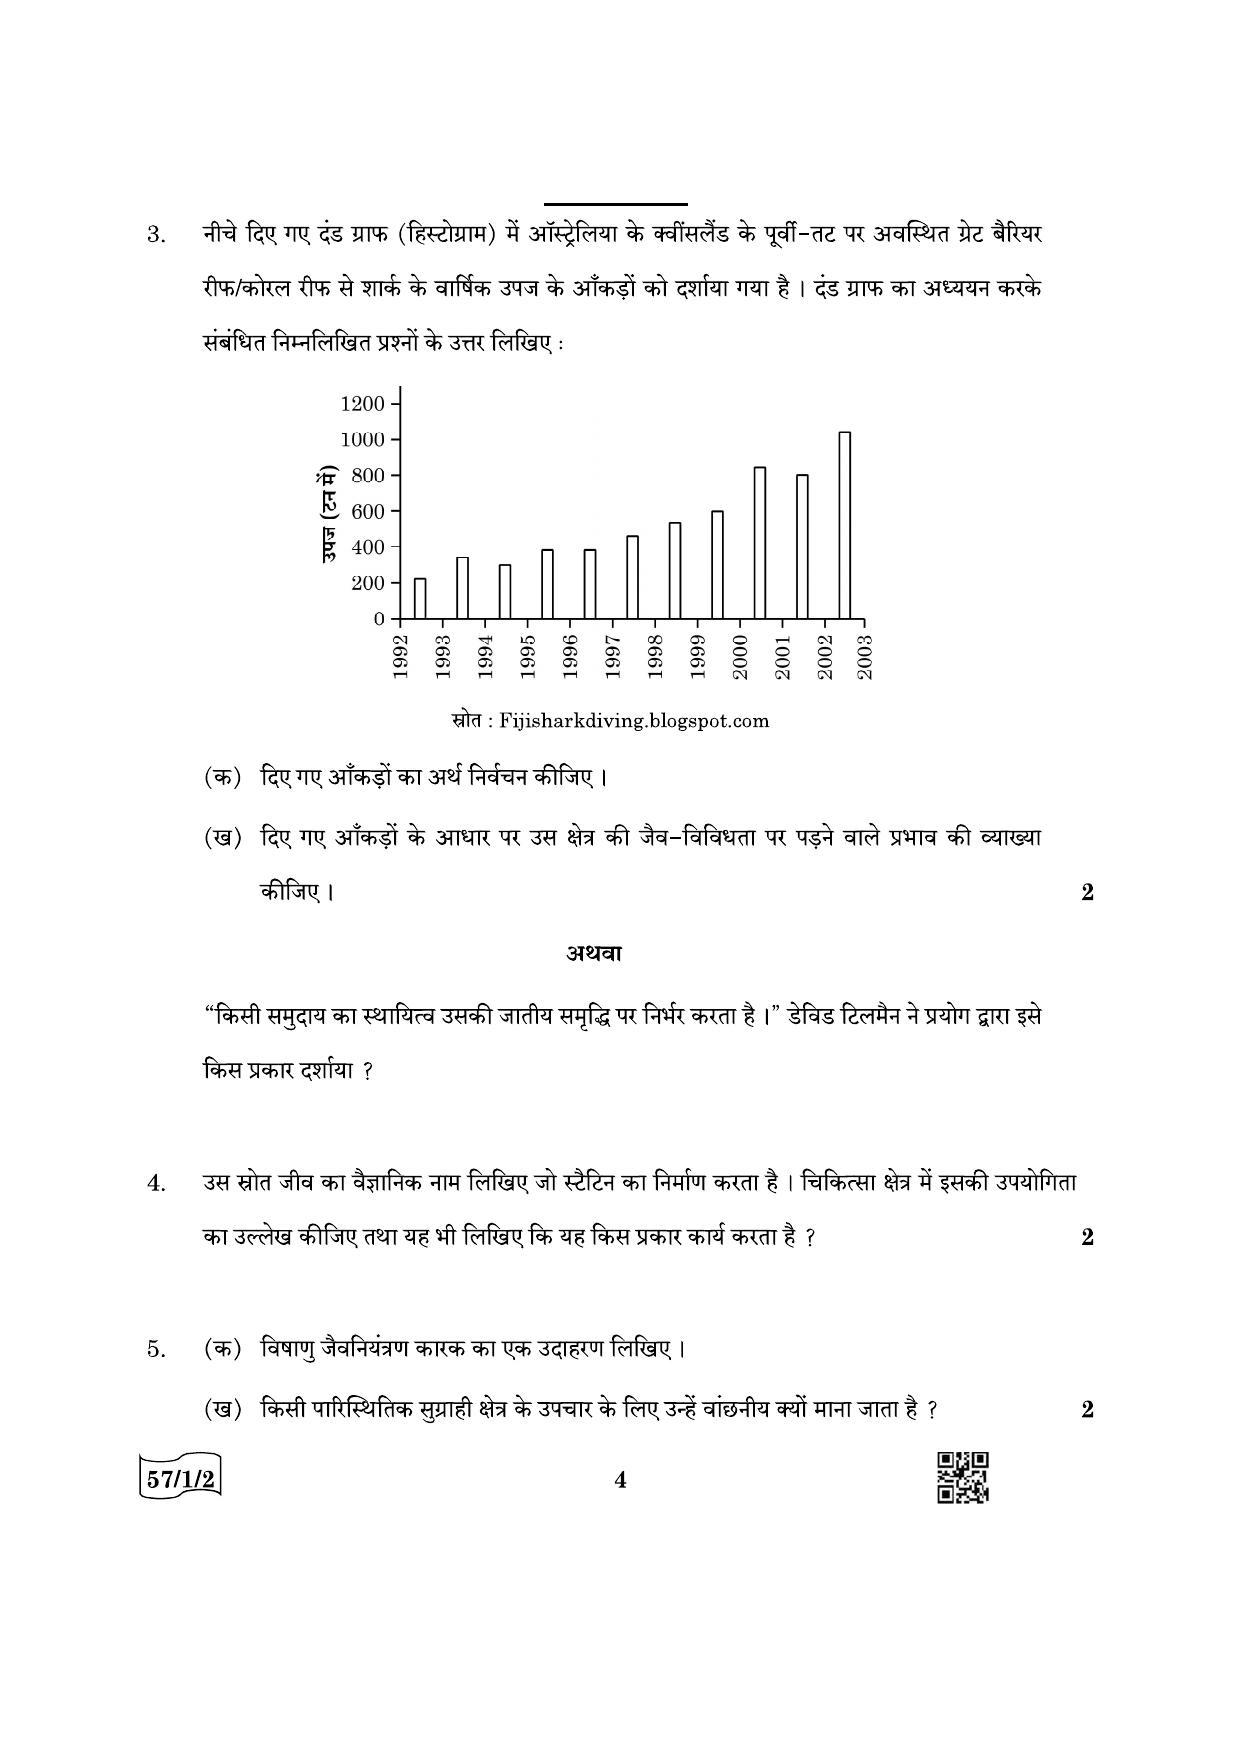 CBSE Class 12 57-1-2 Biology 2022 Question Paper - Page 4